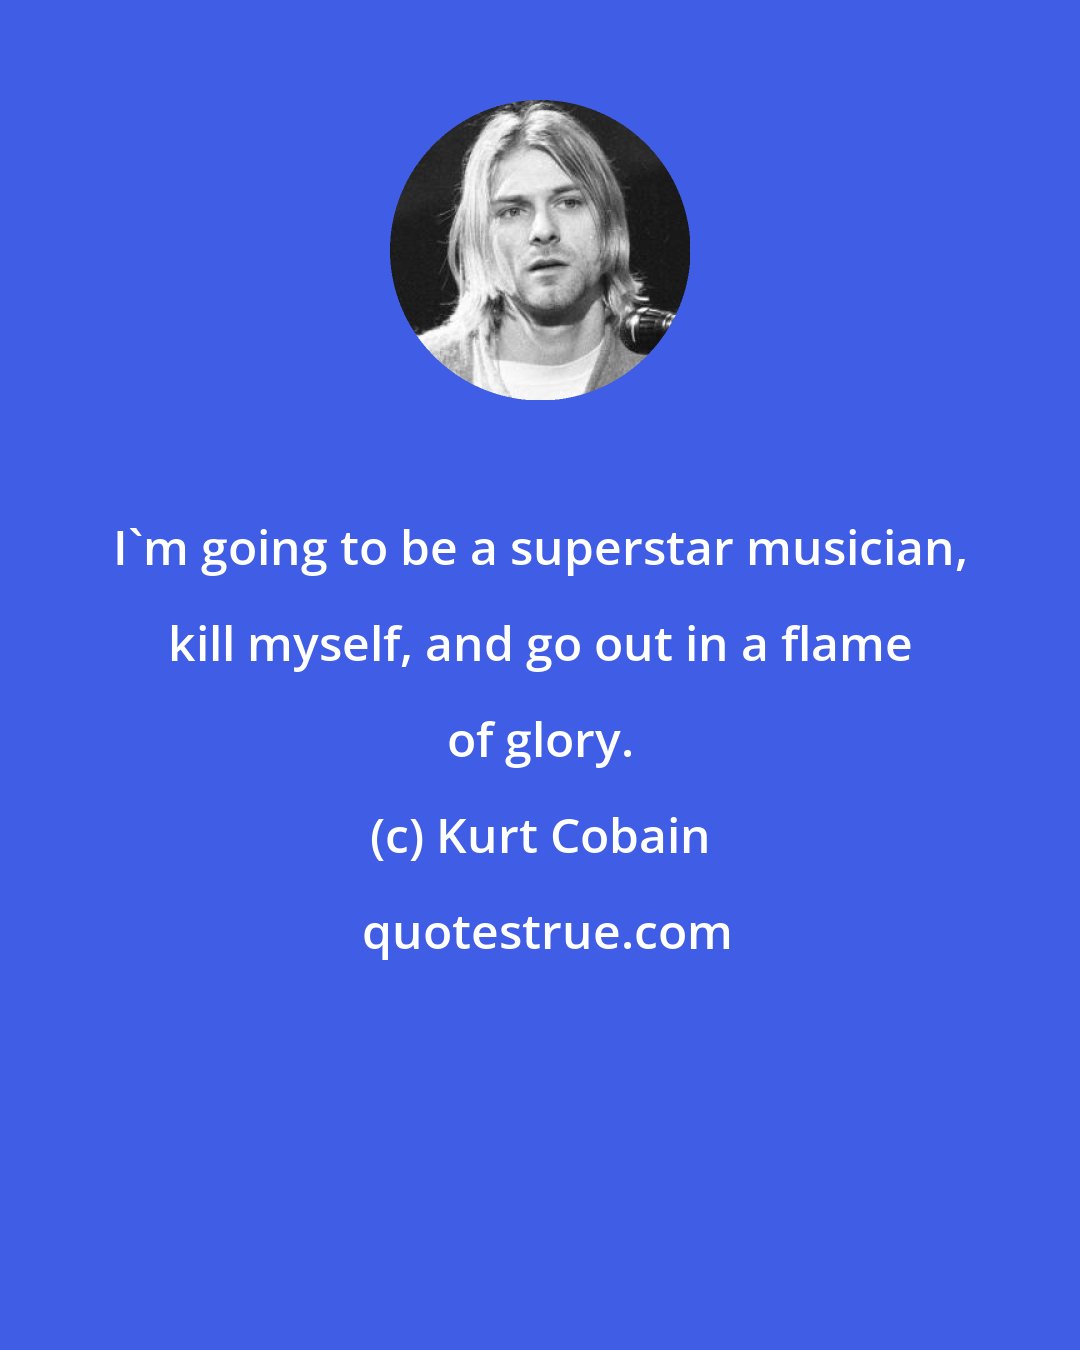 Kurt Cobain: I'm going to be a superstar musician, kill myself, and go out in a flame of glory.